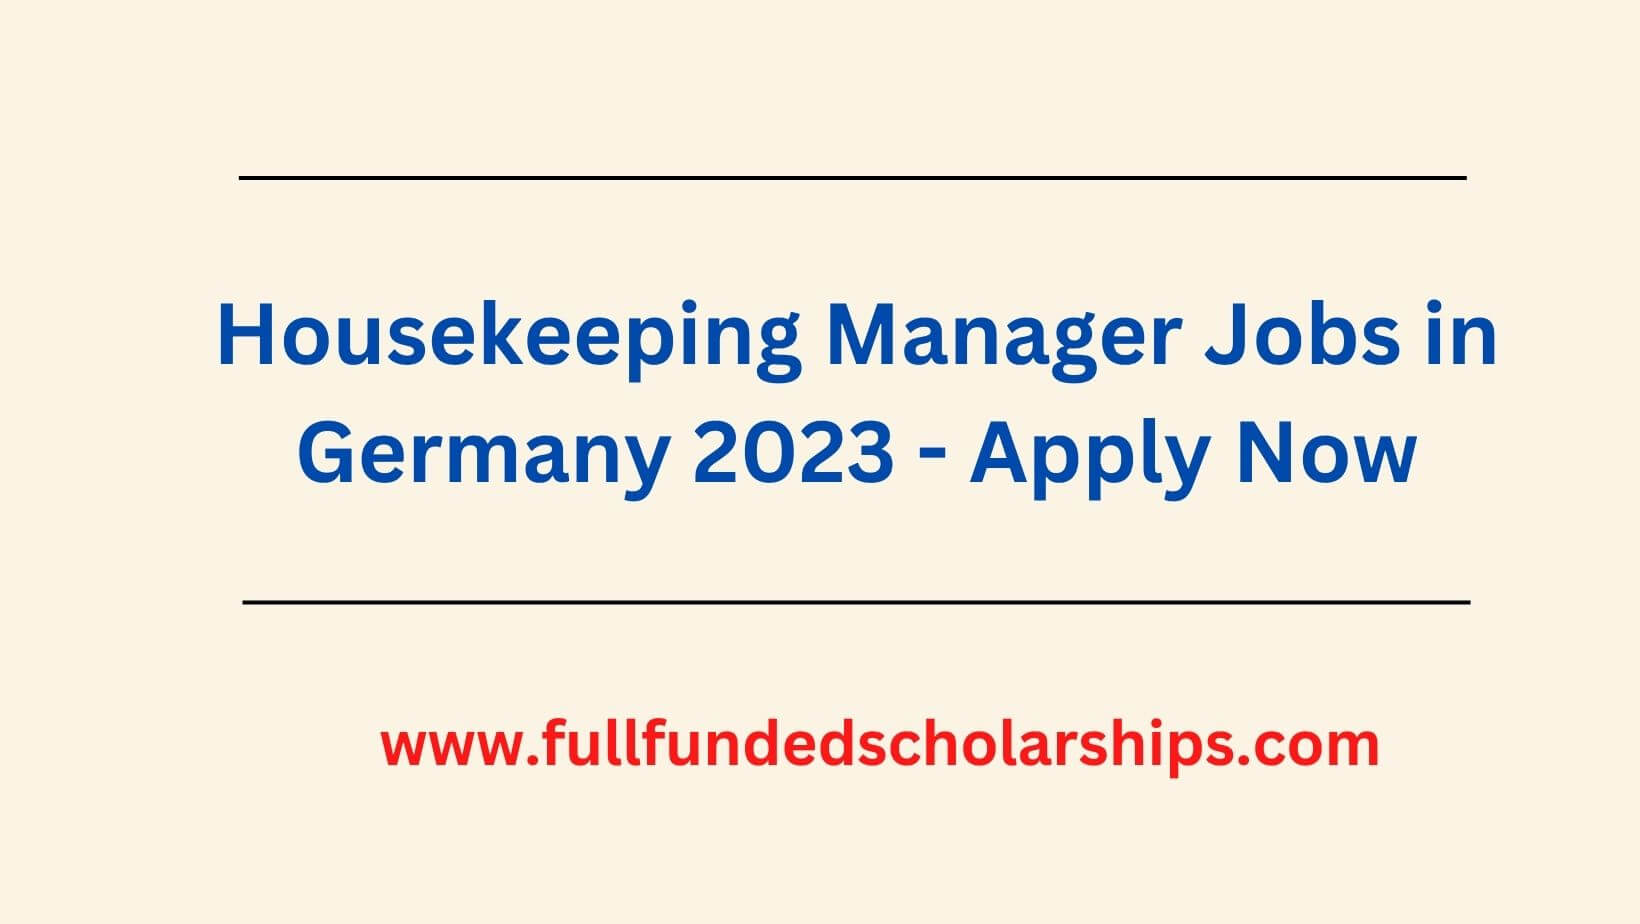 Housekeeping Manager Jobs in Germany 2023